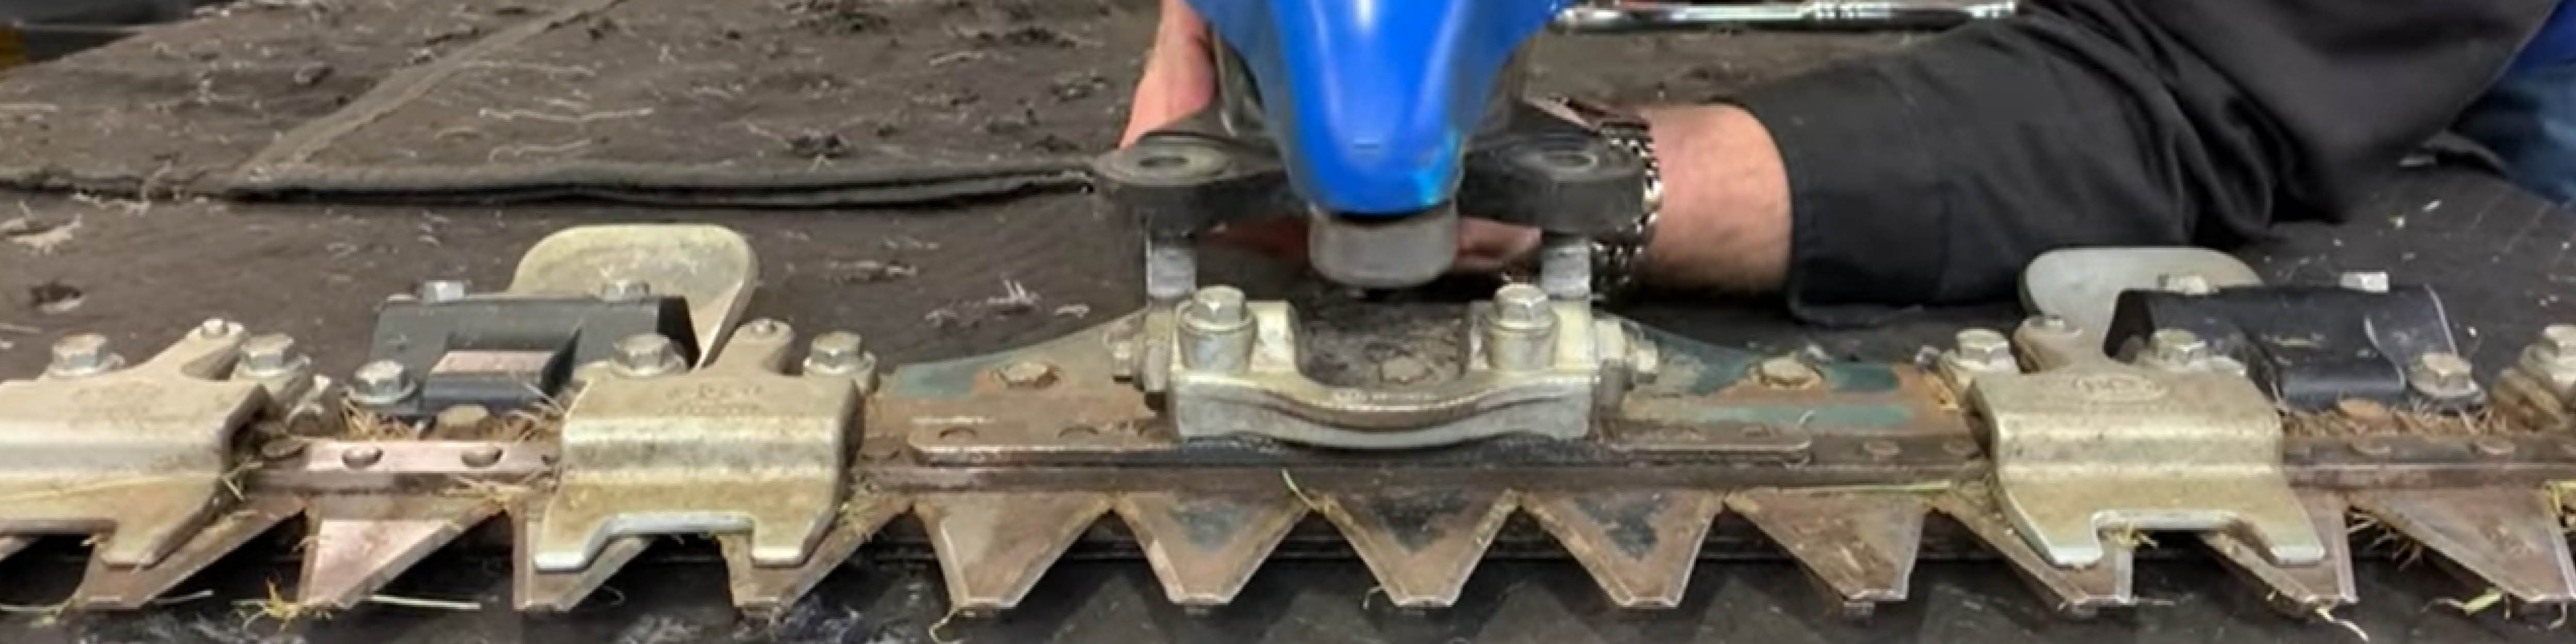 New How-To Video: Changing the Width of a BCS Sickle Bar Attachment